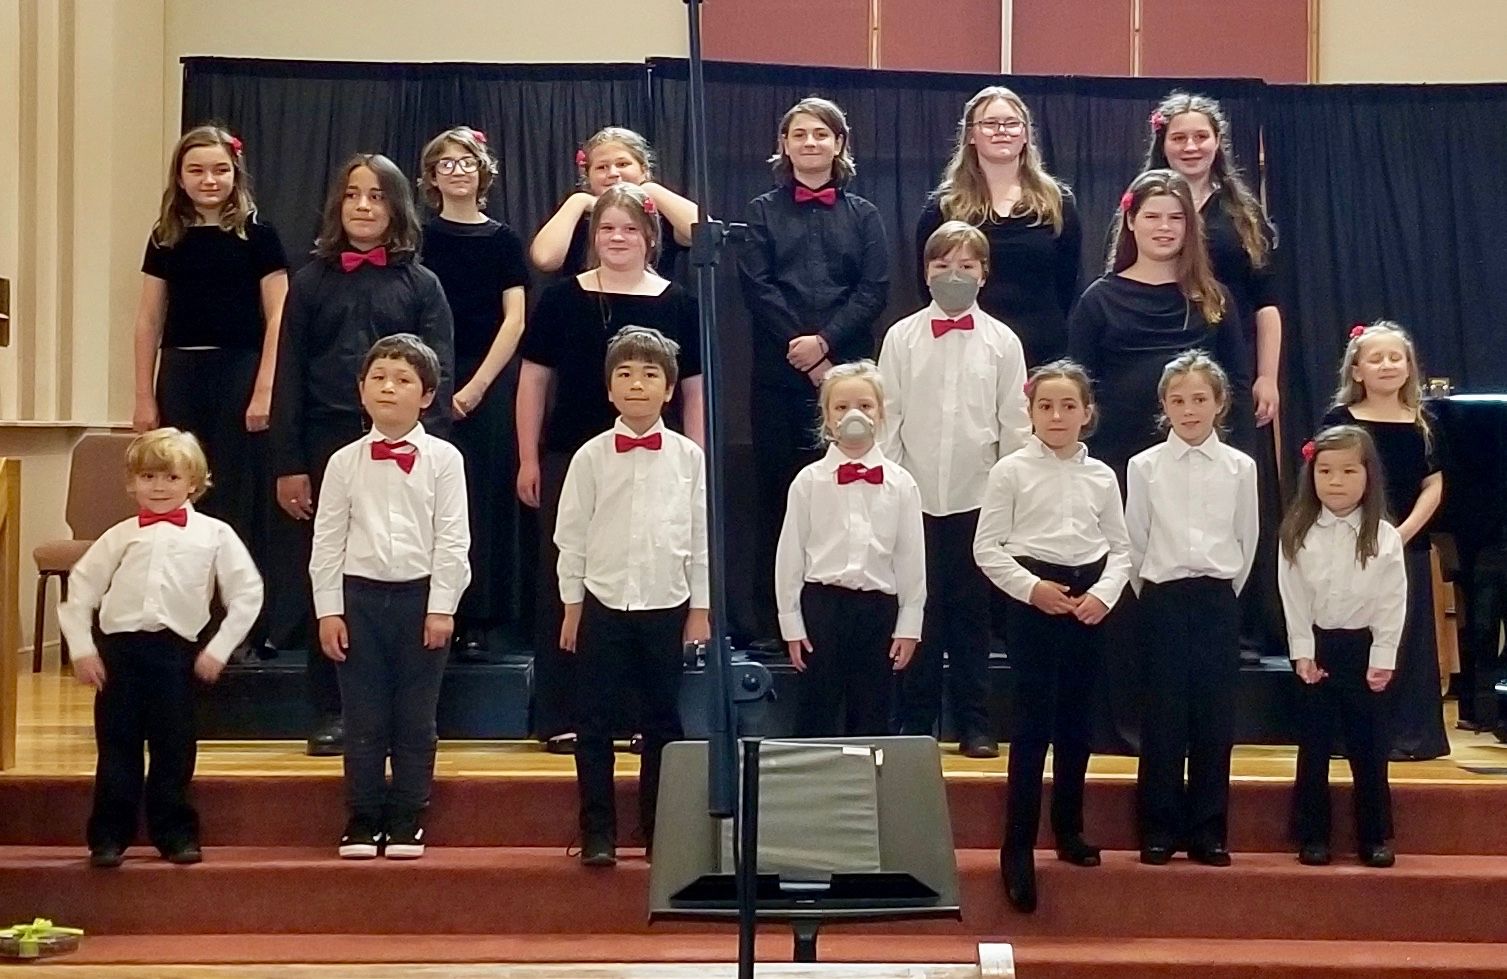 Local kids’ choir composed songs, while researcher observed